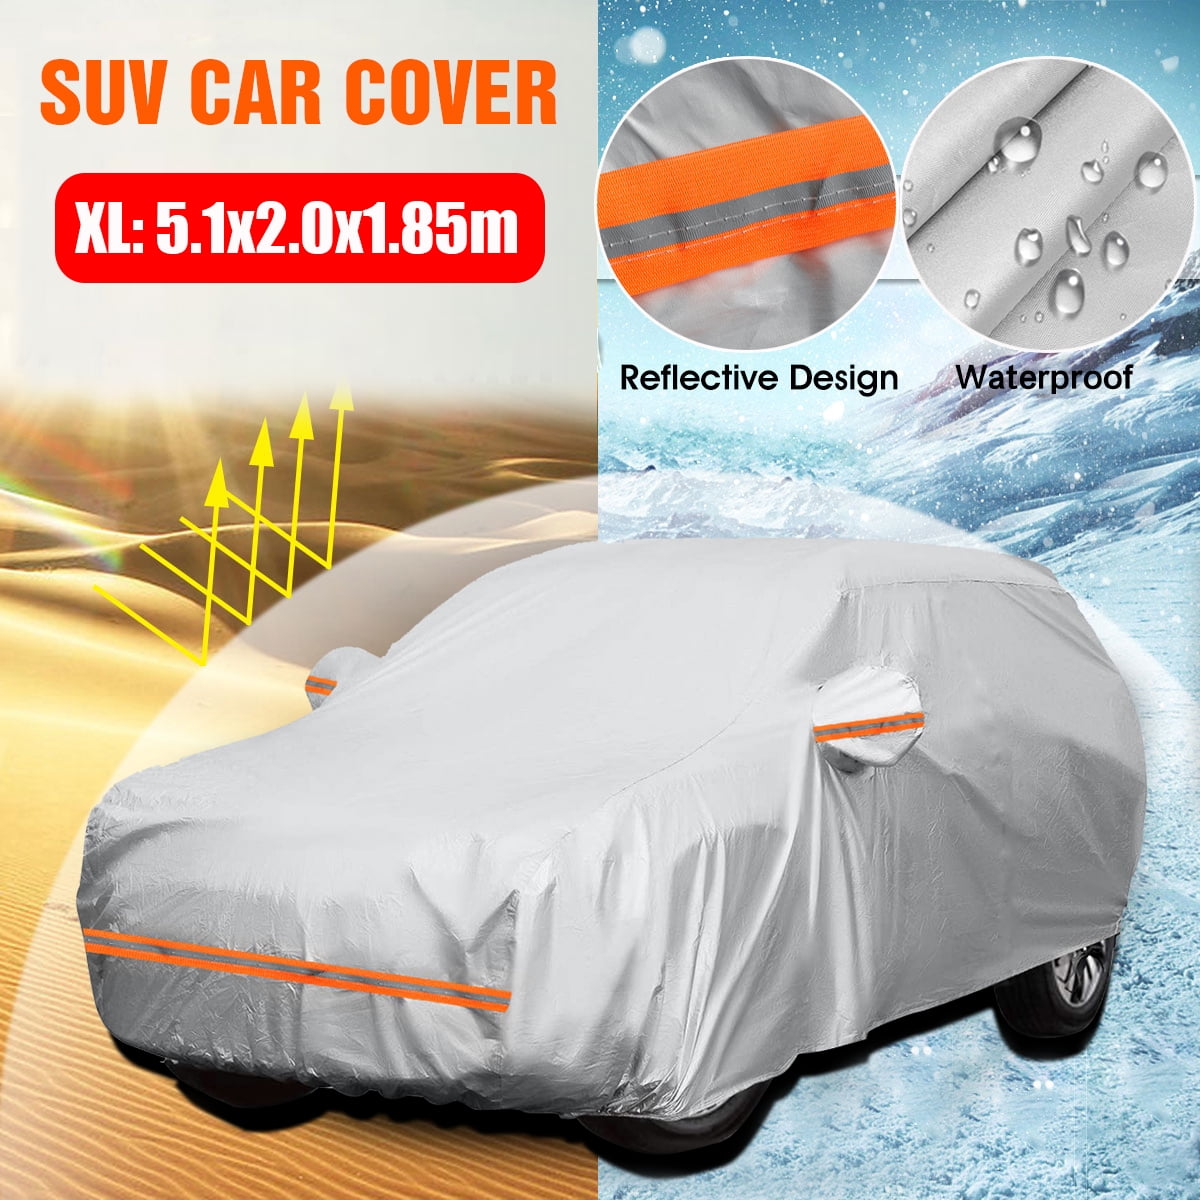 Full SUV Car Cover Waterproof Outdoor Rain Dust UV Resistant Protection S/M/L